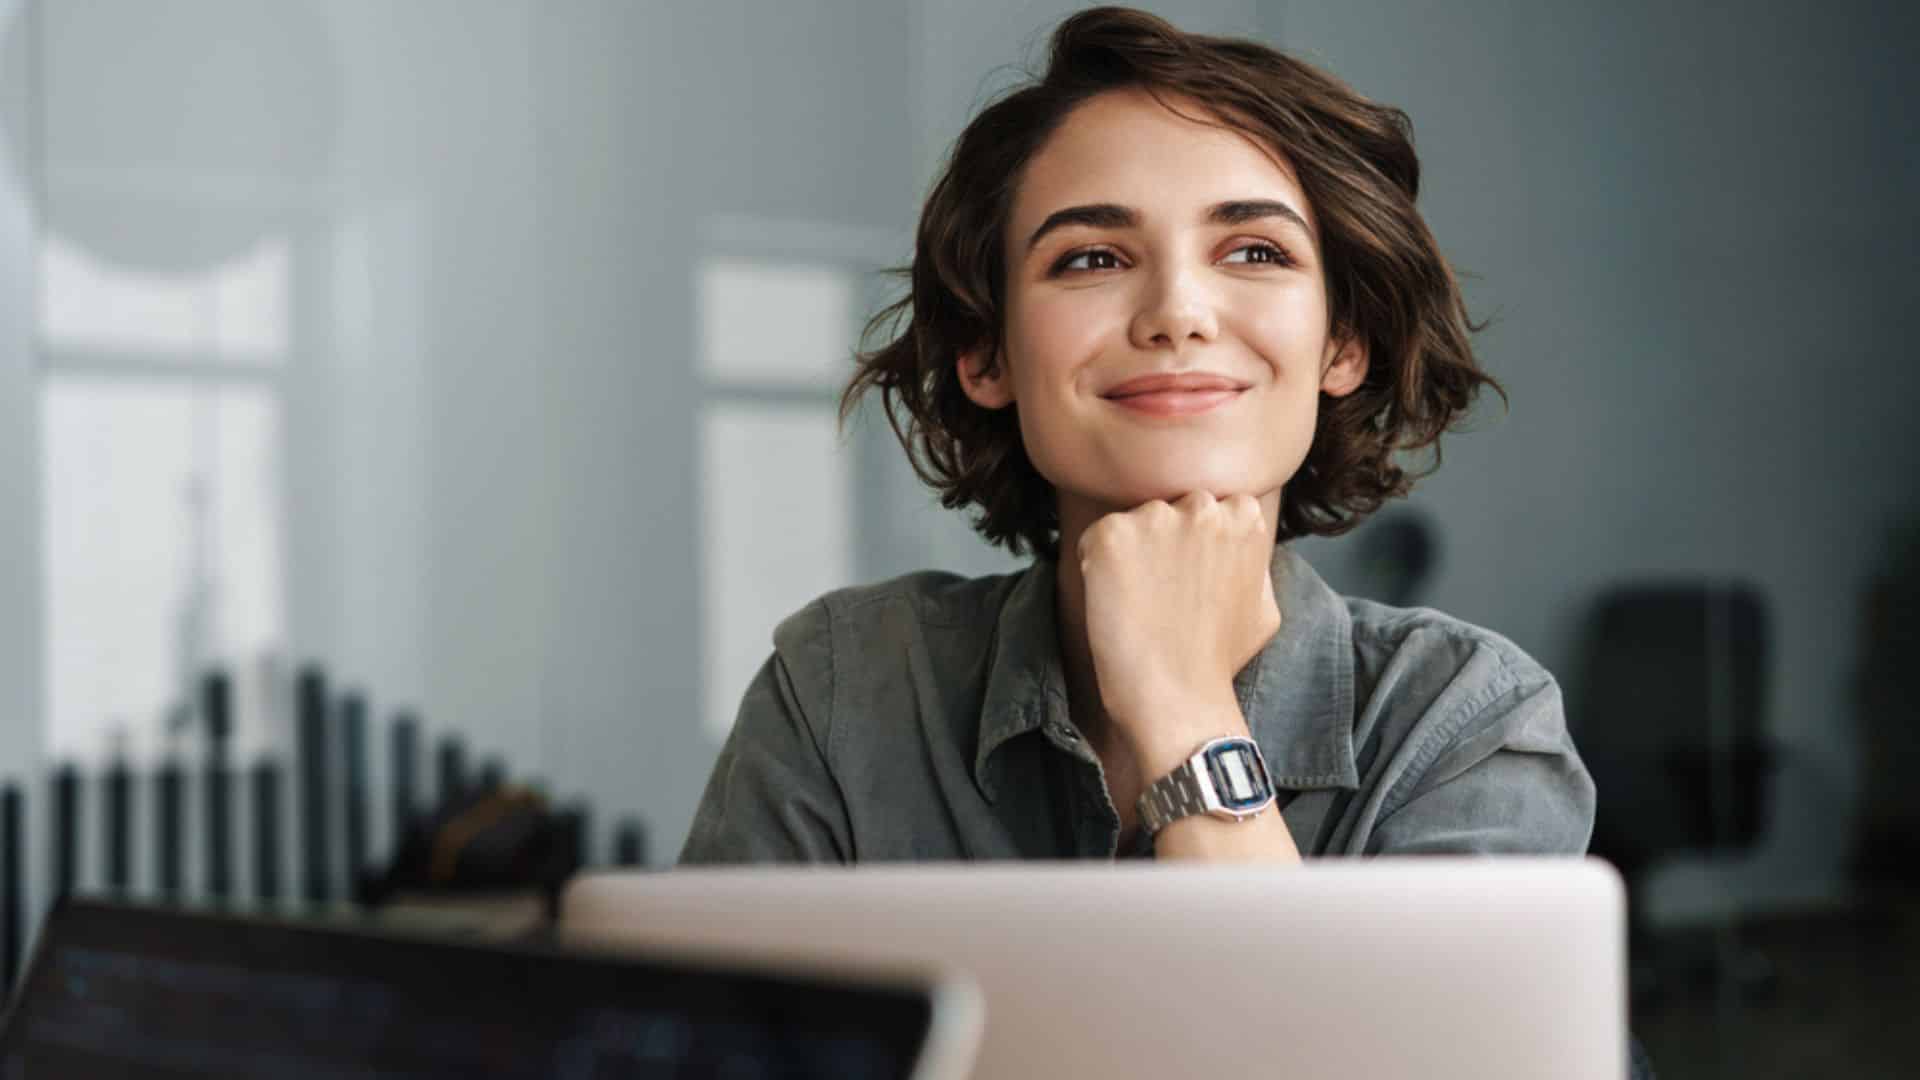 image showing a woman happy at work - to illustrate low-stress jobs